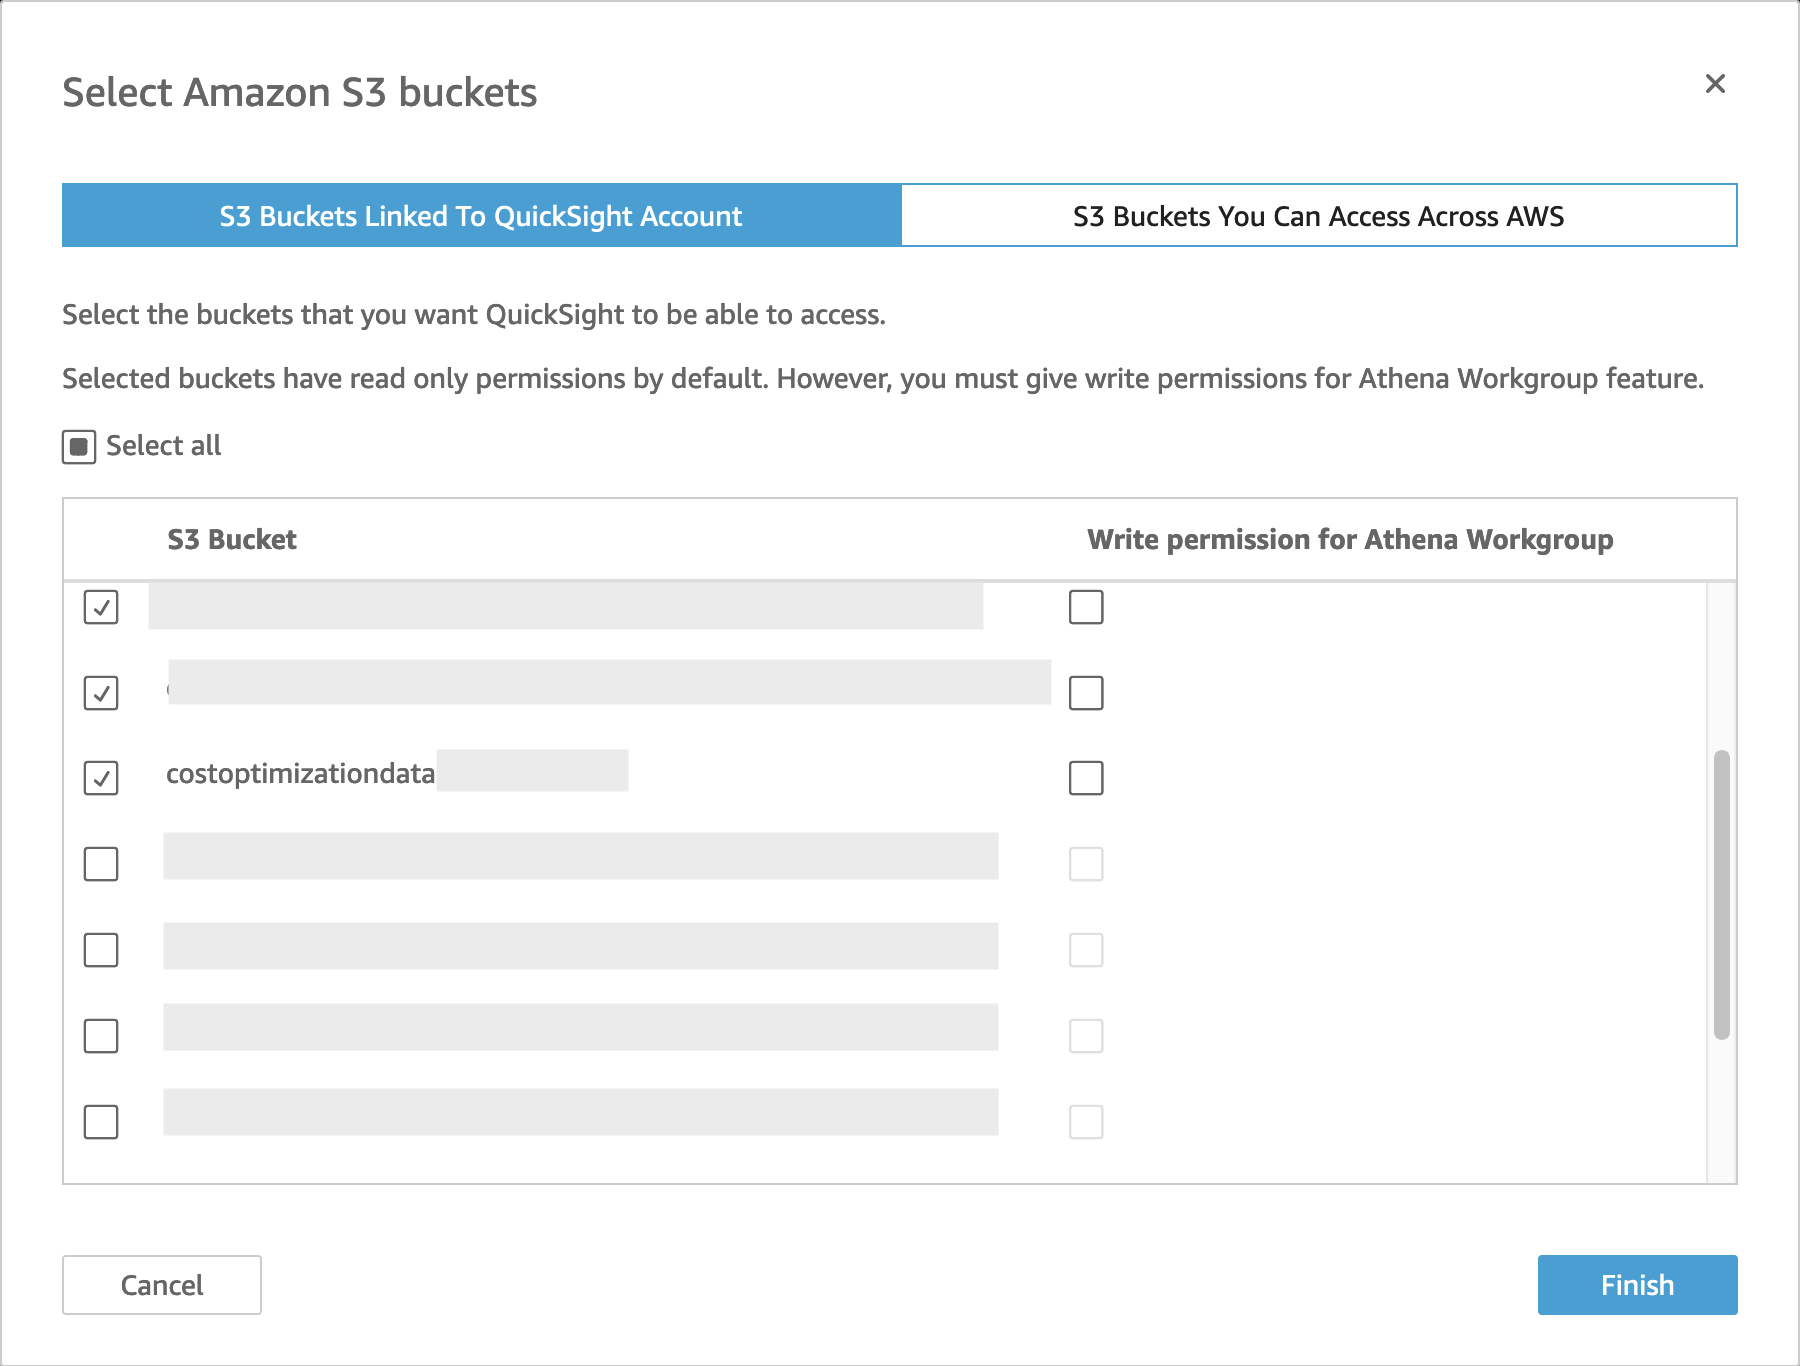 Image of s3 buckets that are linked to the QuickSight account. Enable bucket and give Athena Write permission to it.